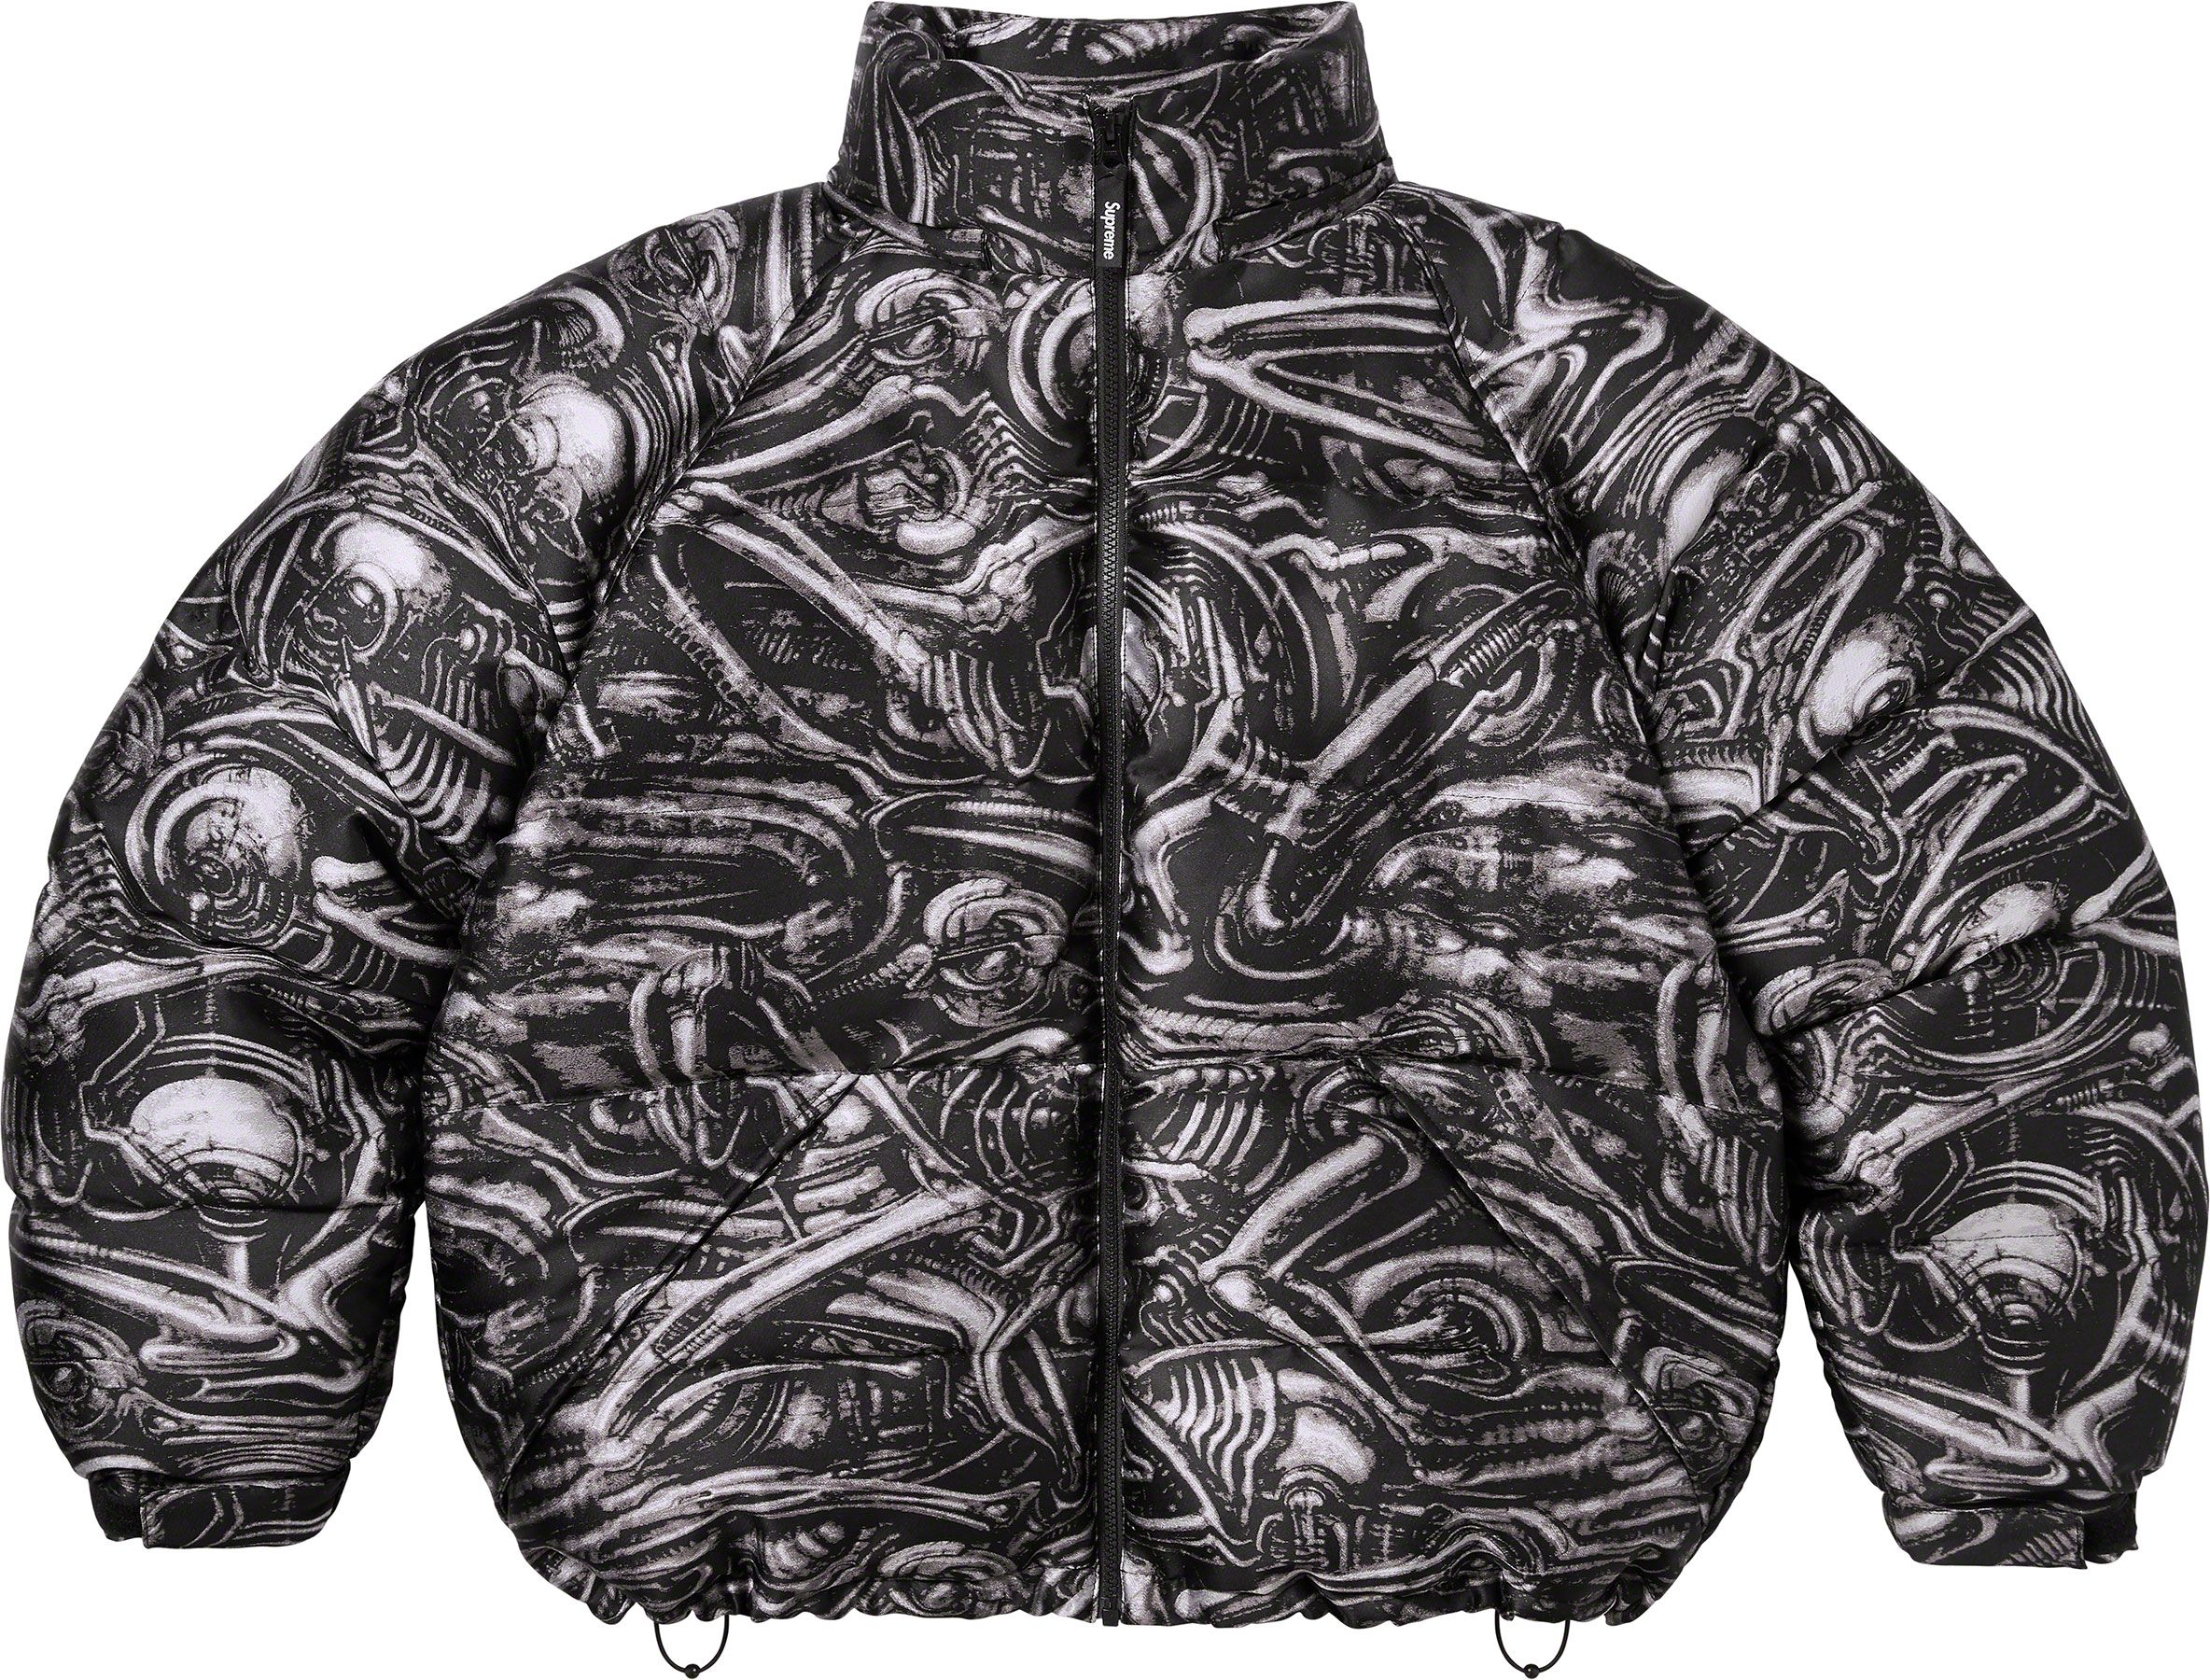 Supreme H.R. Giger Embroidery Work Jackeどうぞよろしくお願いいたします